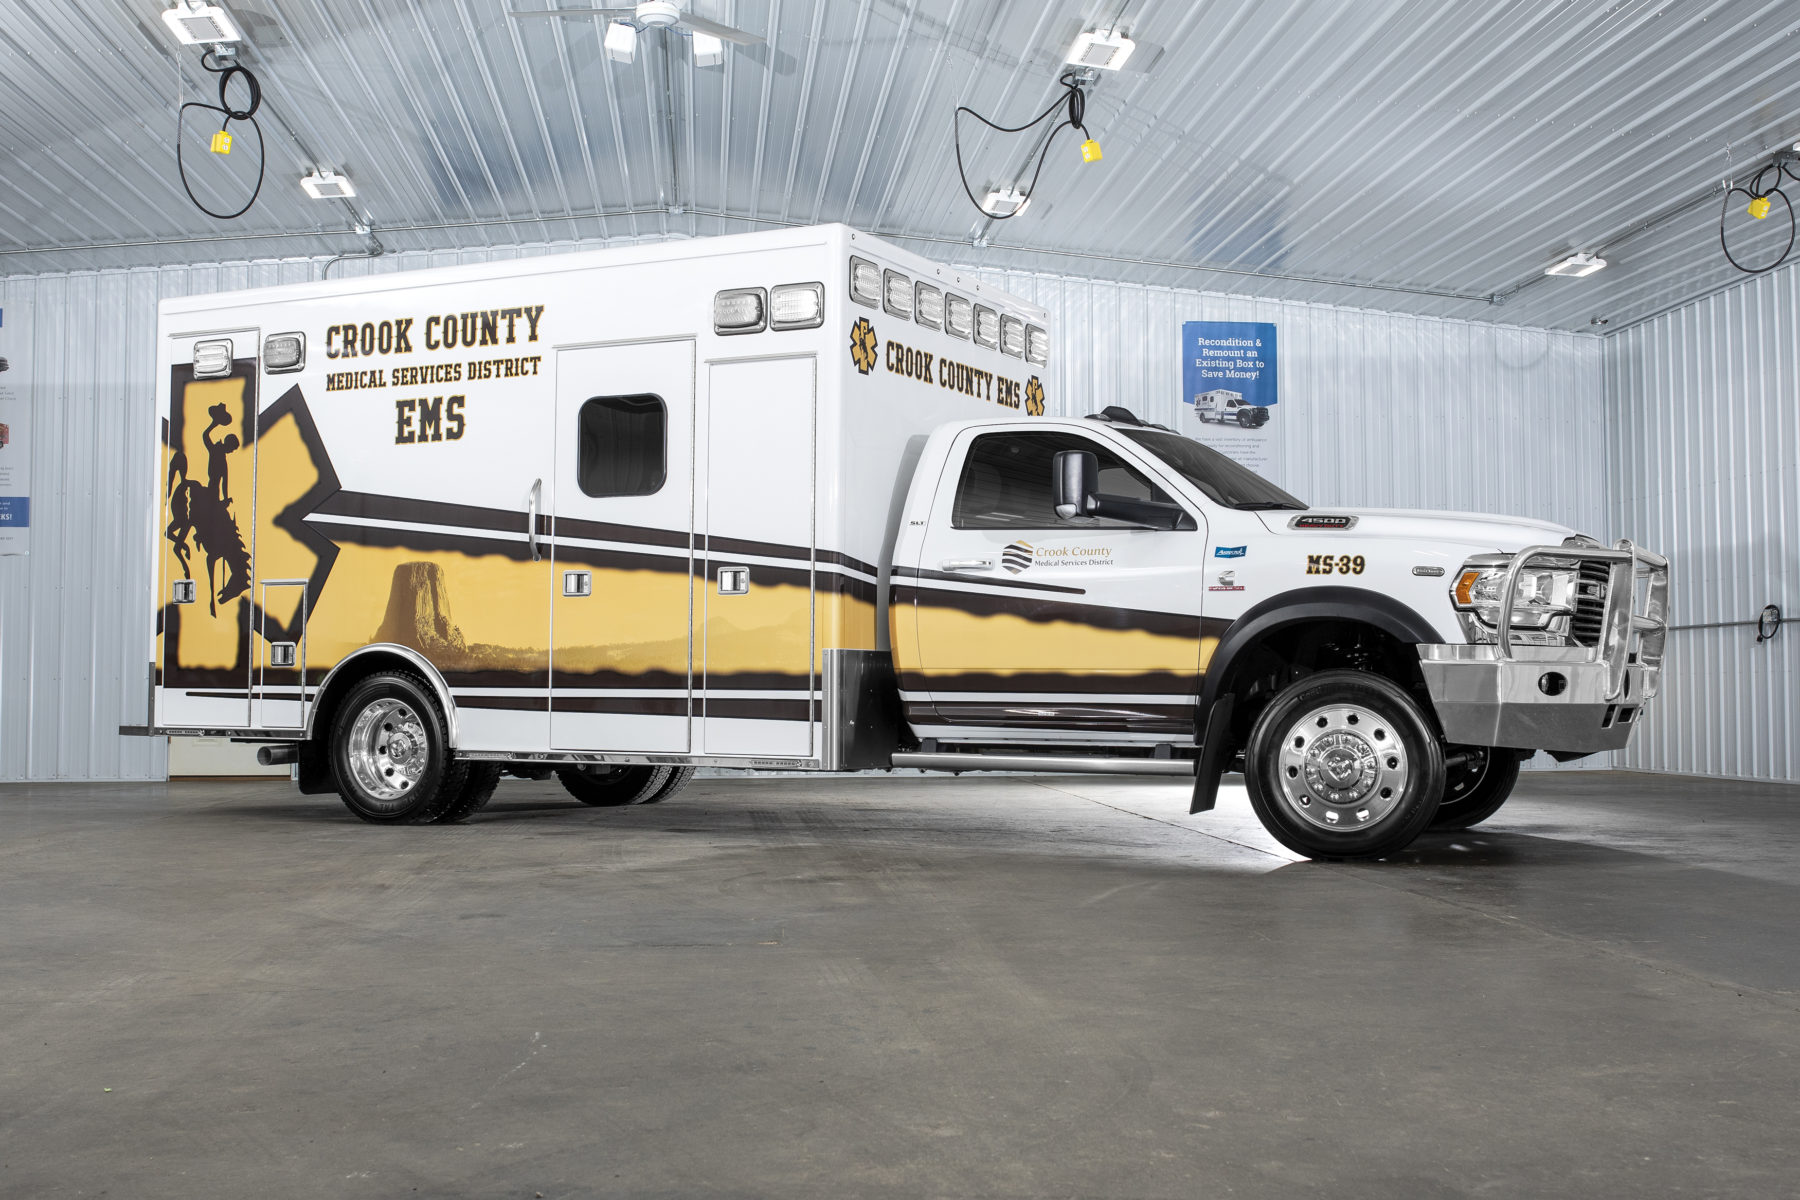 2019 Ram 4500 4x4 Heavy Duty Ambulance For Sale – Picture 13